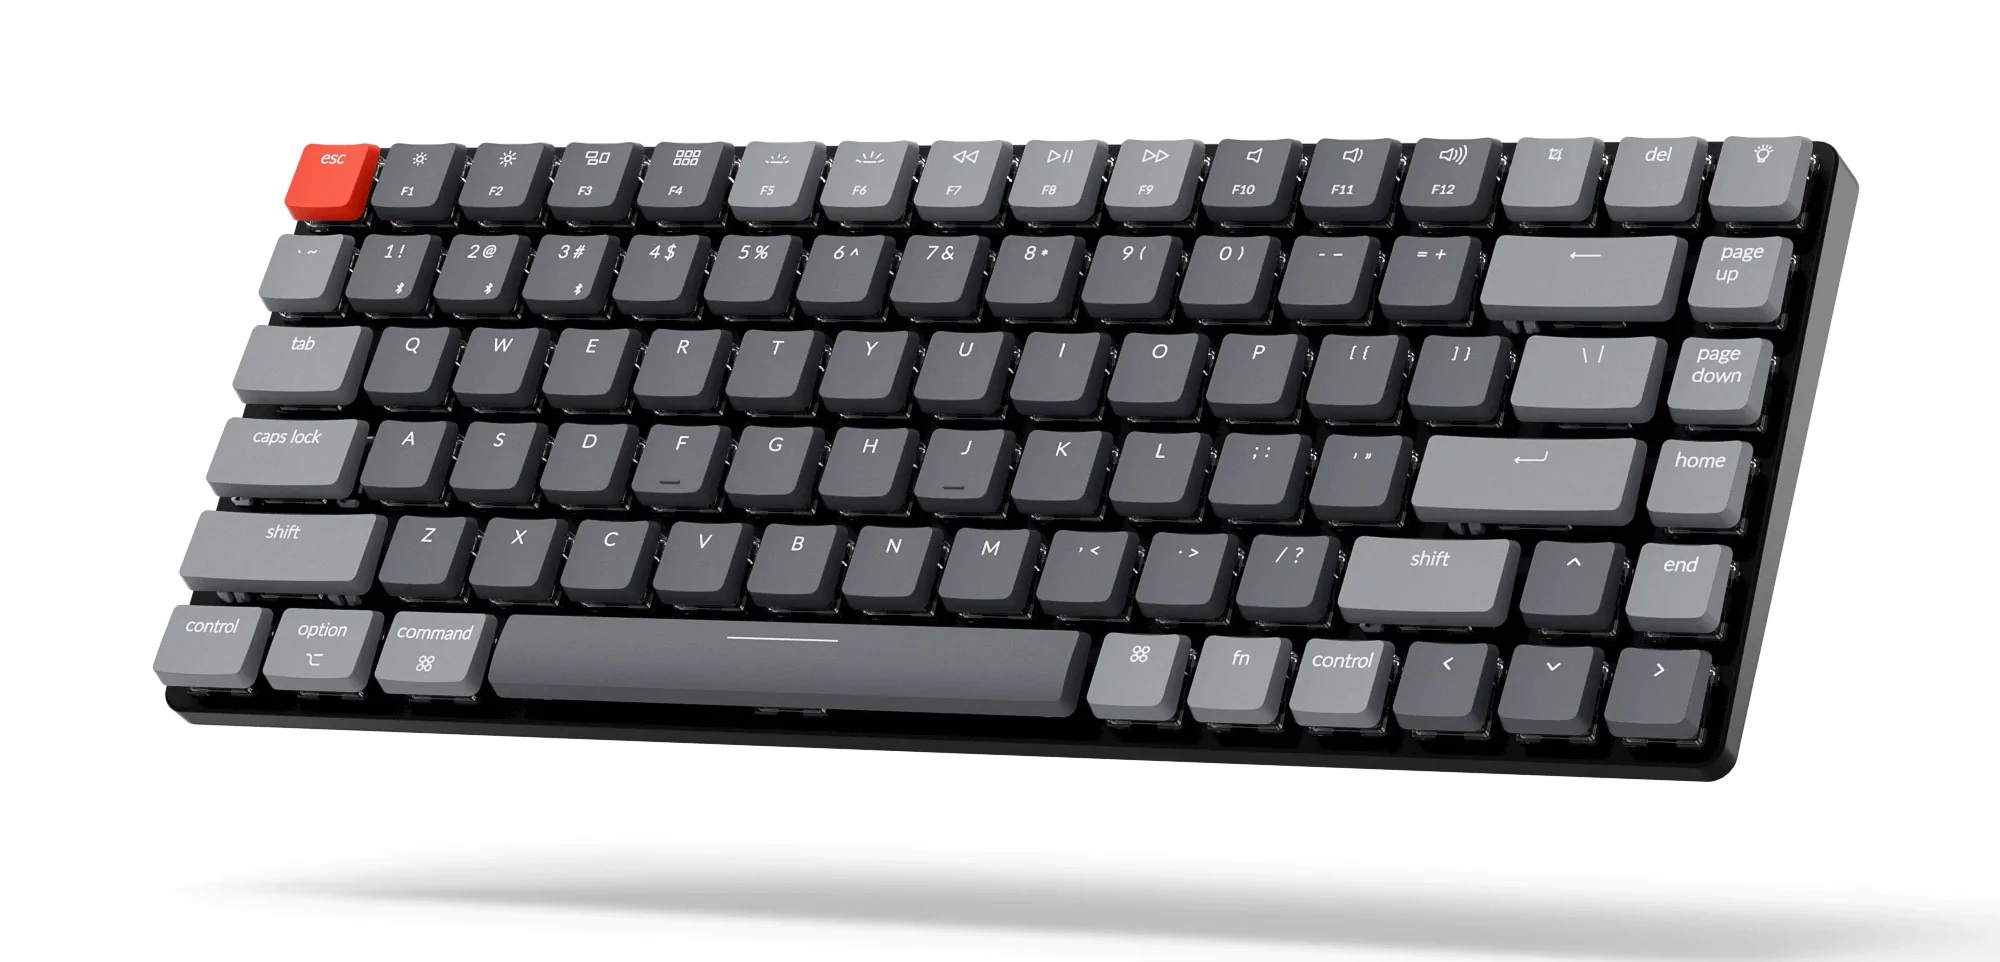 The BEST keyboards to buy in 2022